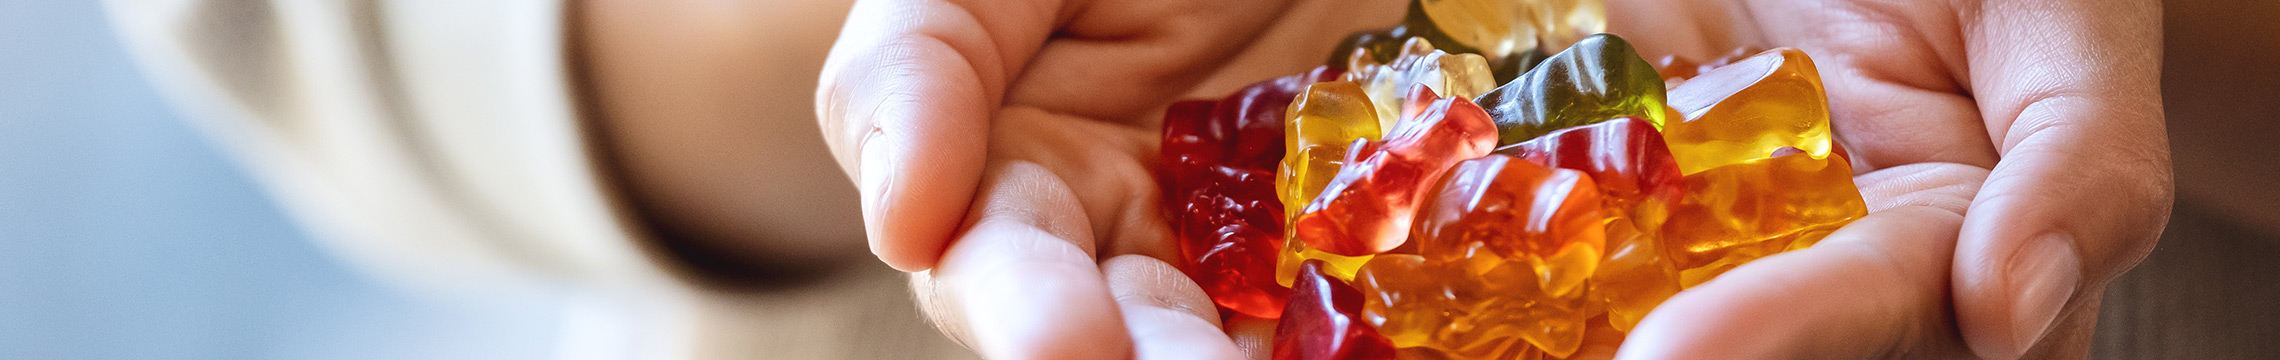 Hands cupped, holding assorted gummy bear candies